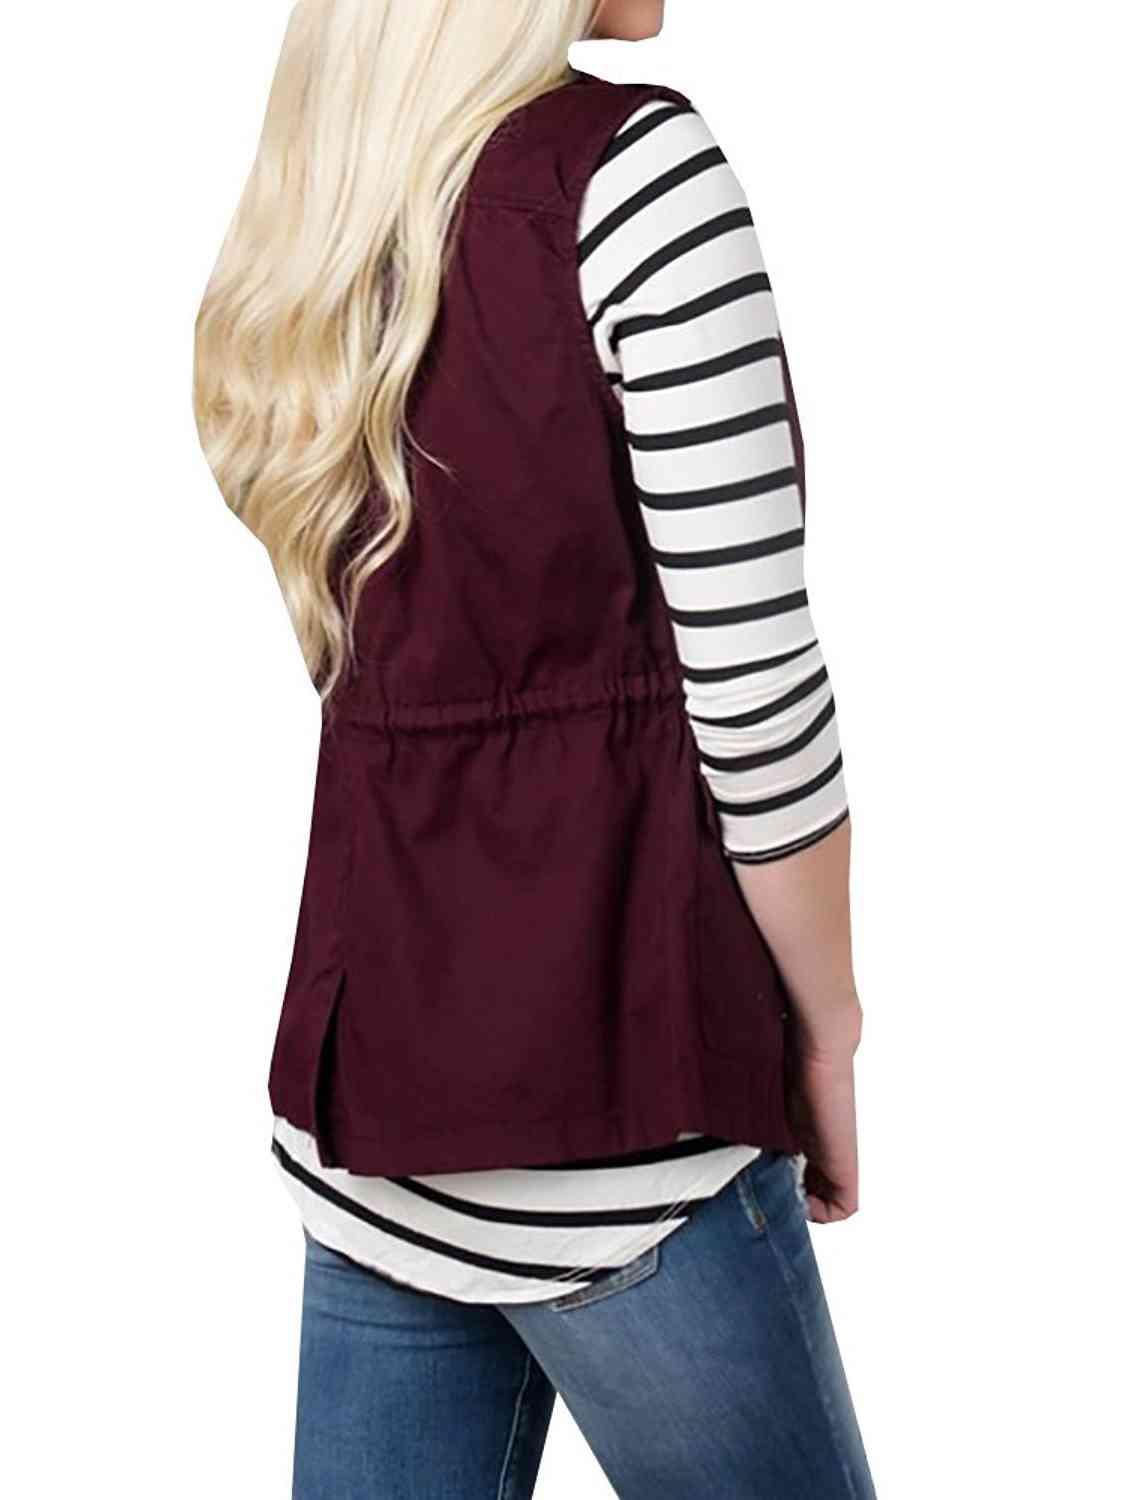 a woman with long blonde hair wearing a maroon vest